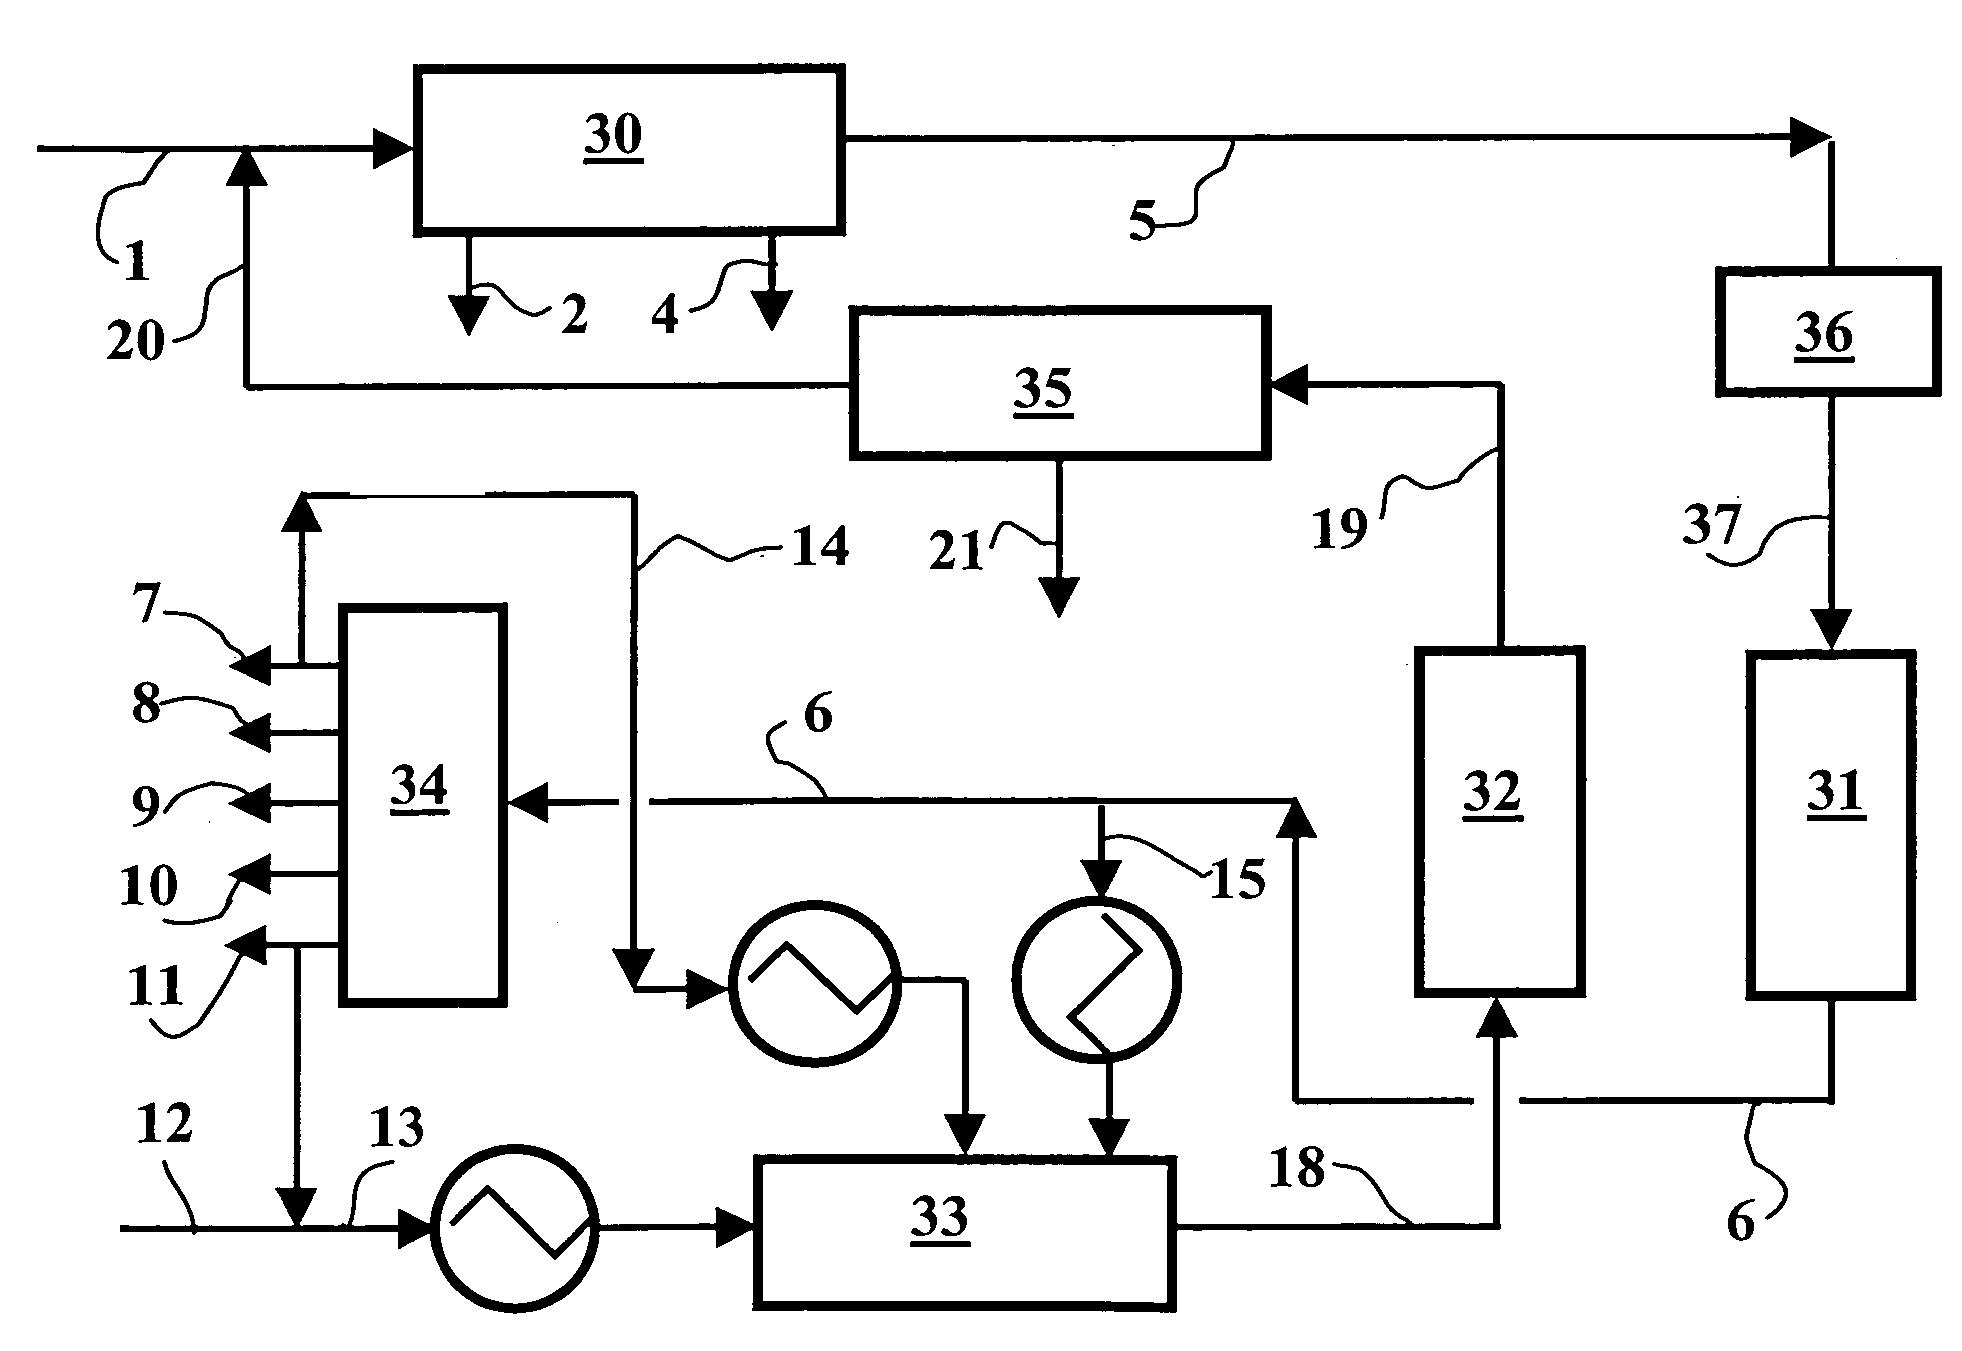 Method of purifying a natural gas by mercaptan adsorption